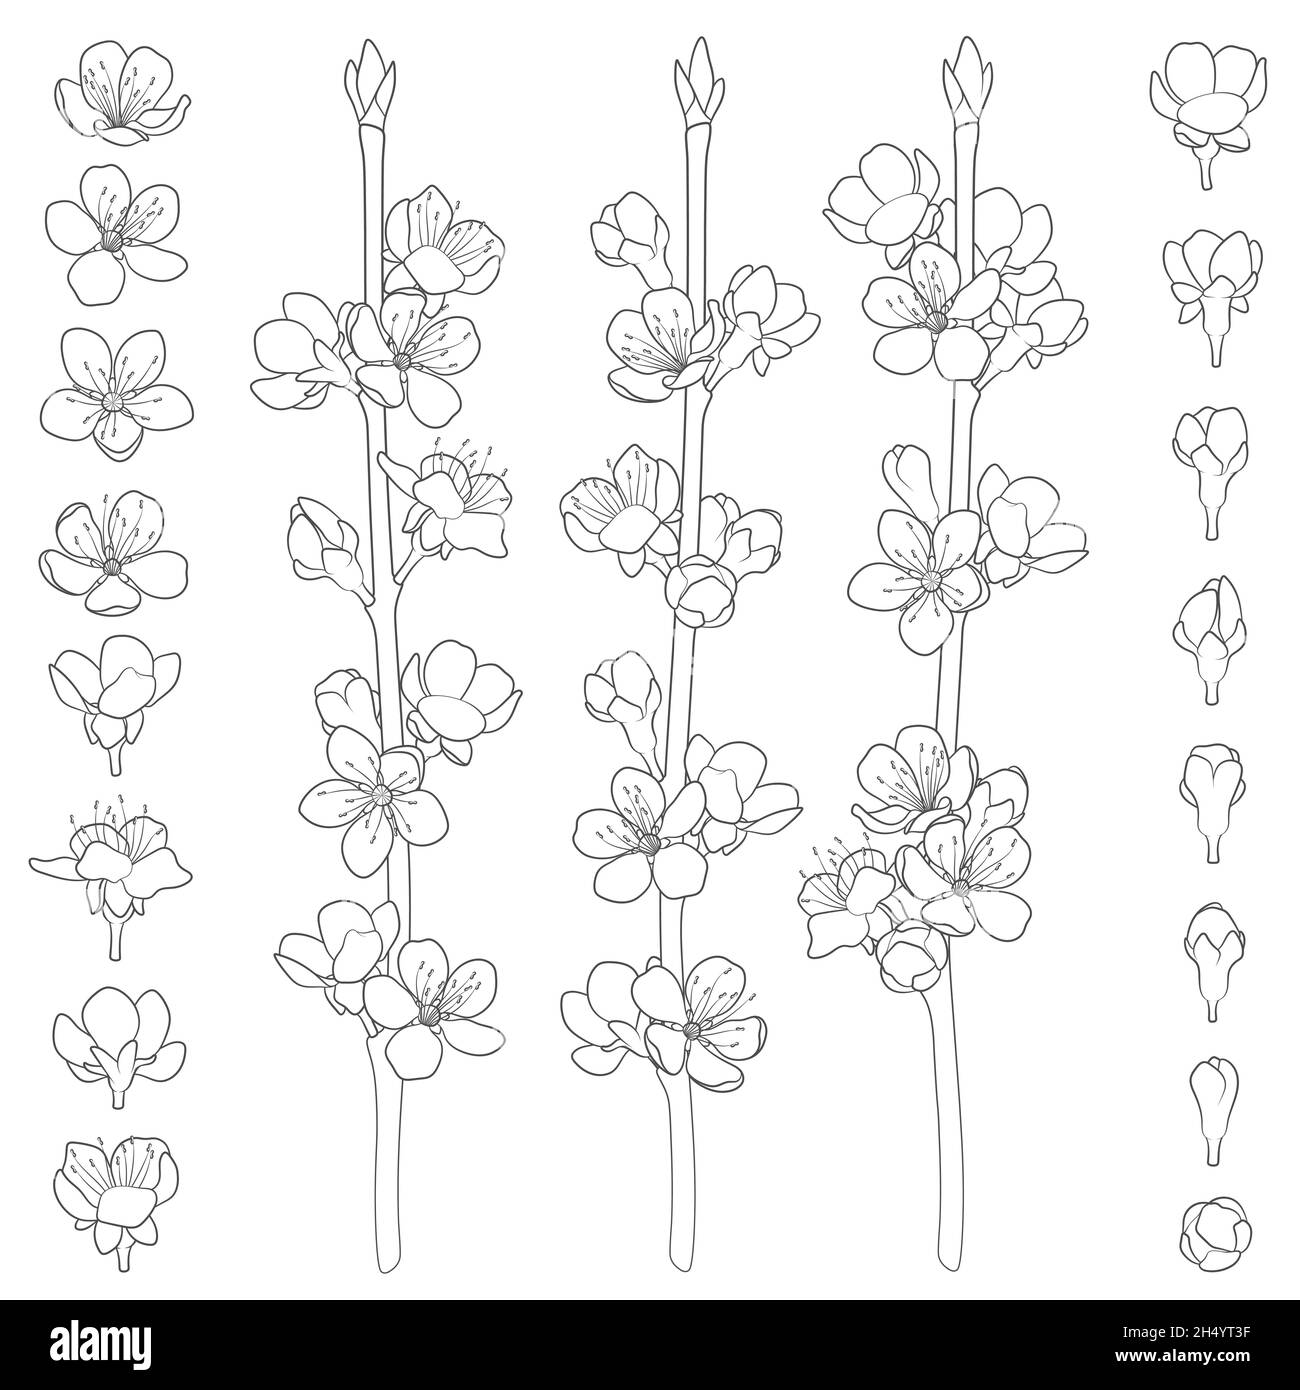 Set of black and white images with blossoming spring branches. Isolated vector objects on white background. Stock Vector